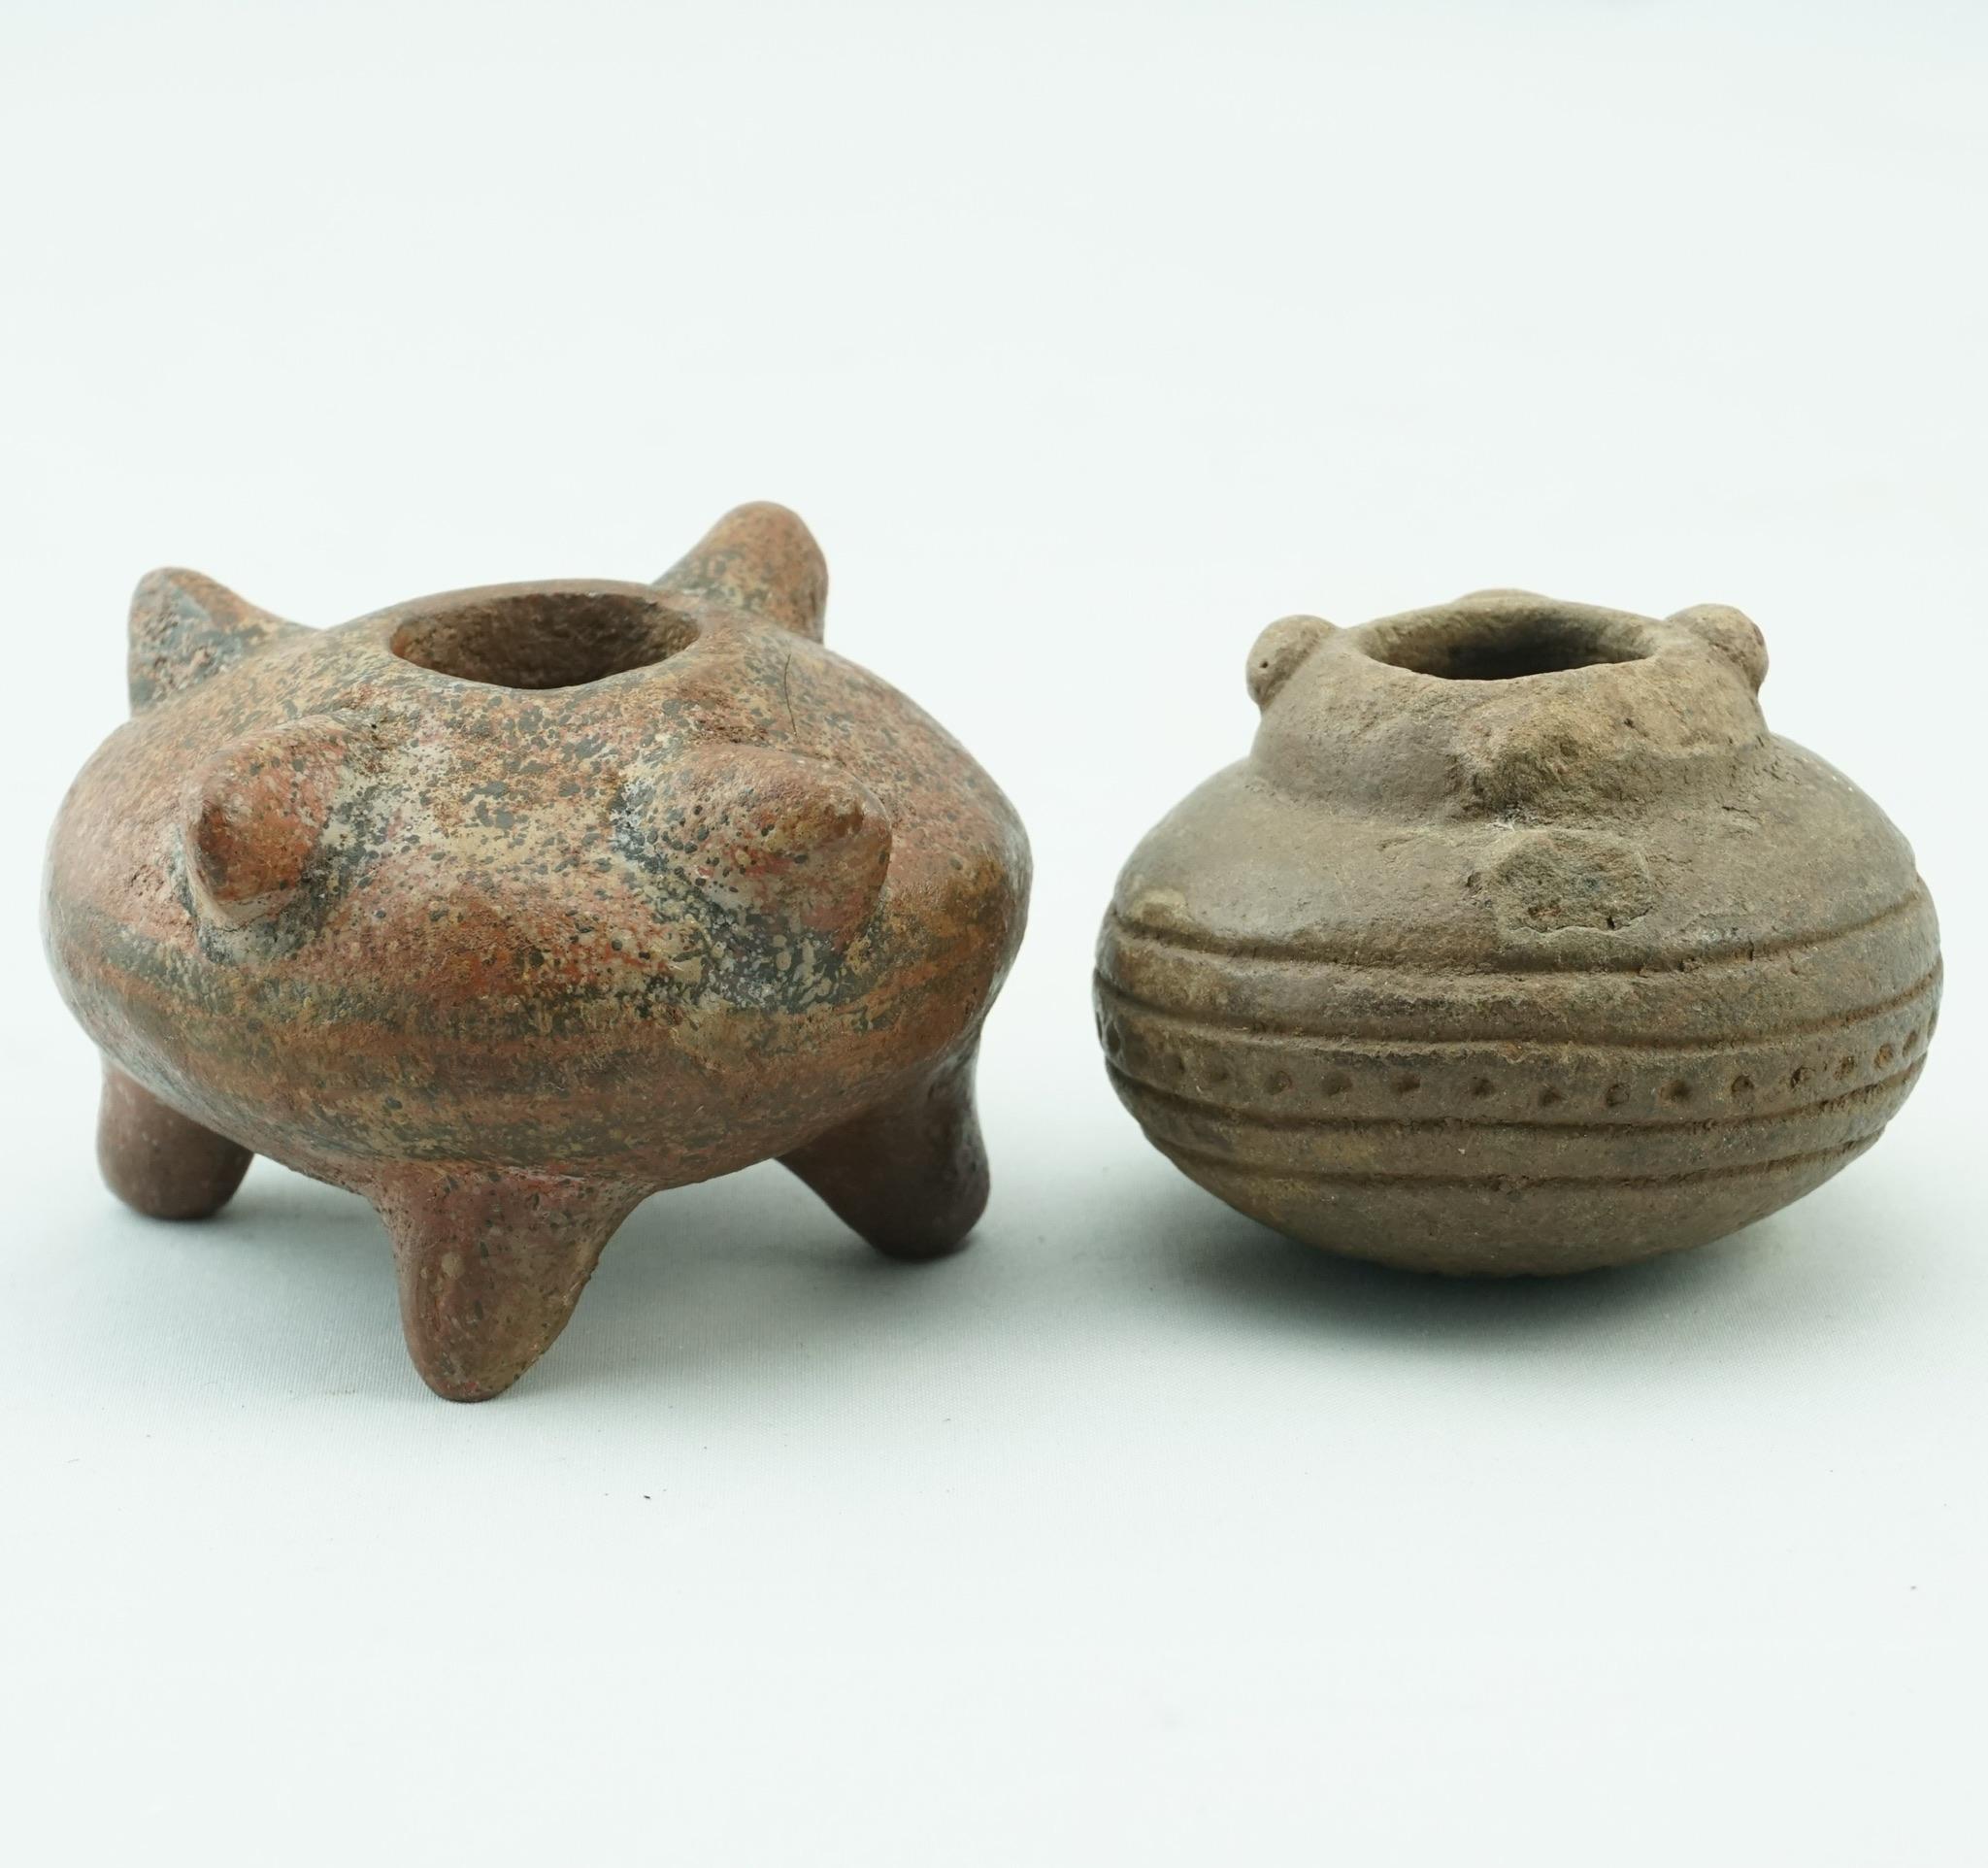 Pair of diminutive Costa Rican pottery burial vessels. One tripod red and black polychromed zoomorphic vessel and a smaller decorated vessel. 100 AD -1350 AD 

Dimensions: 3 inches wide, 1.75 inches Tall 

Smaller: 2.4 inches Wide, 1.6 inches